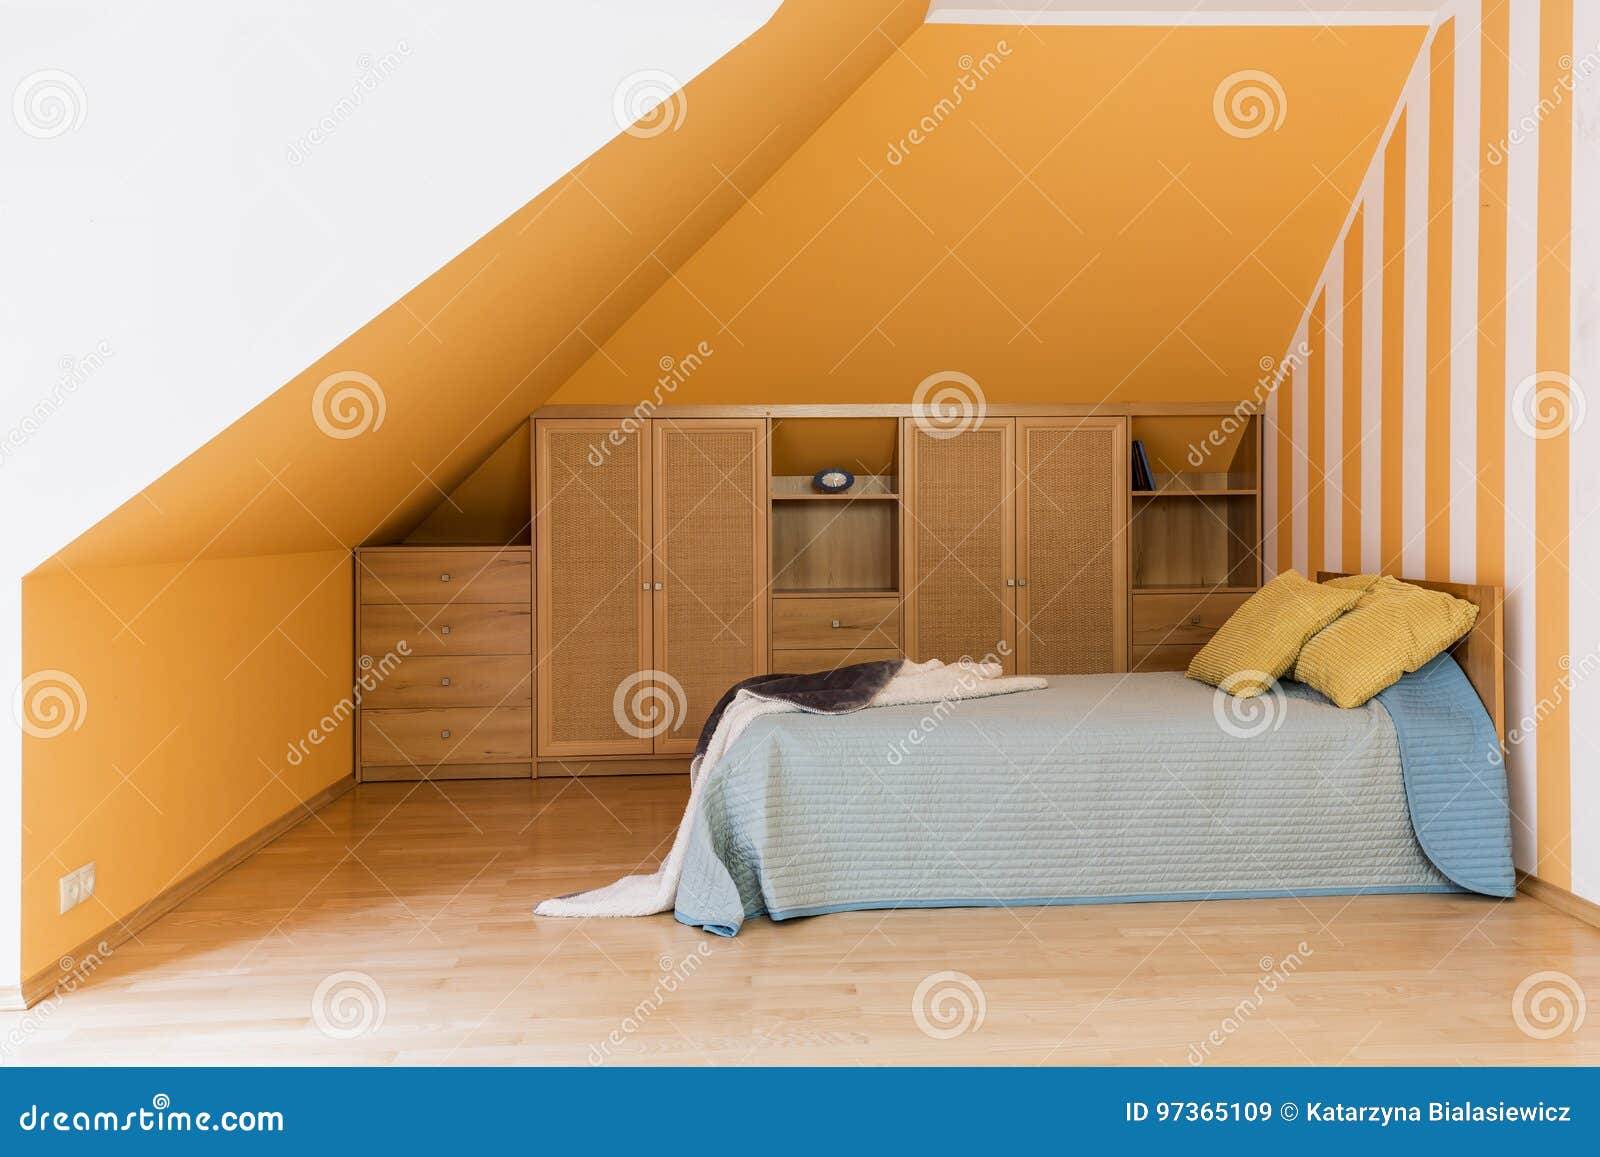 modest bedroom at the attic